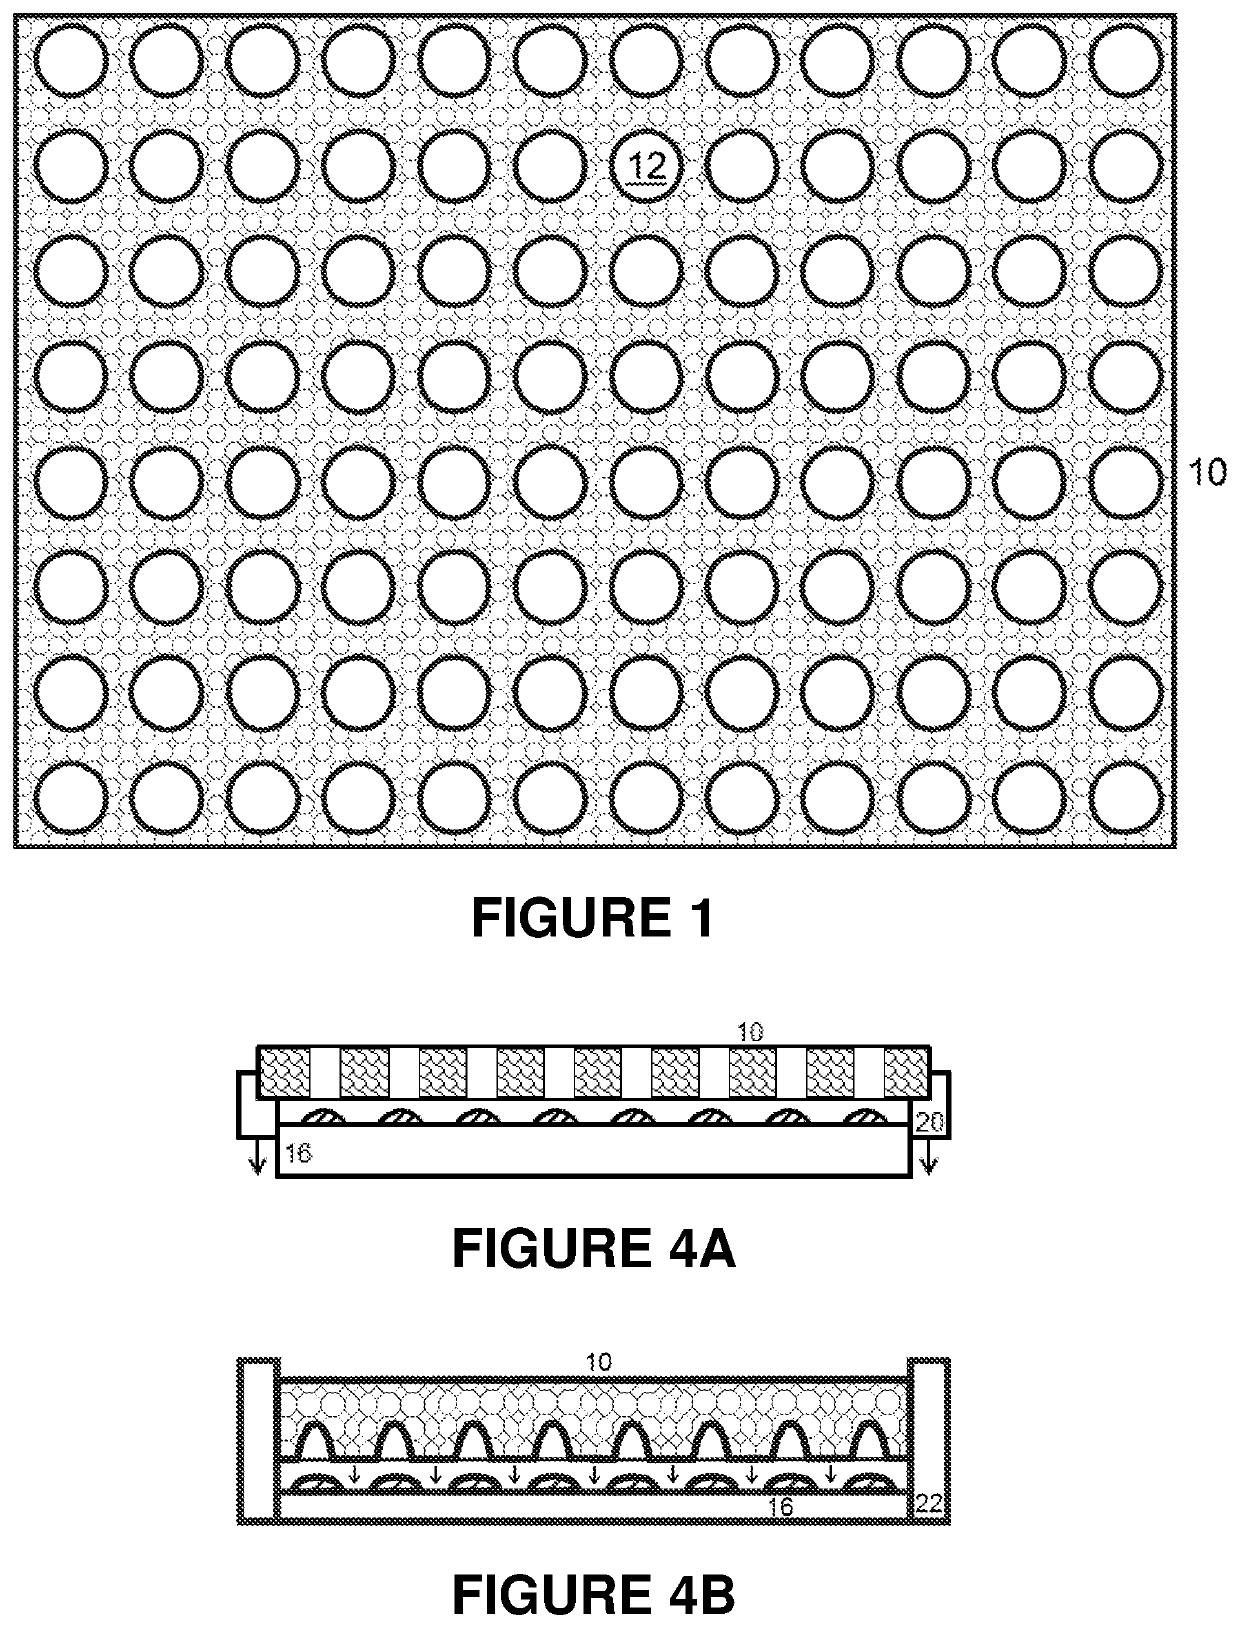 Separation of liquid in droplets and sedimented material enclosed therein